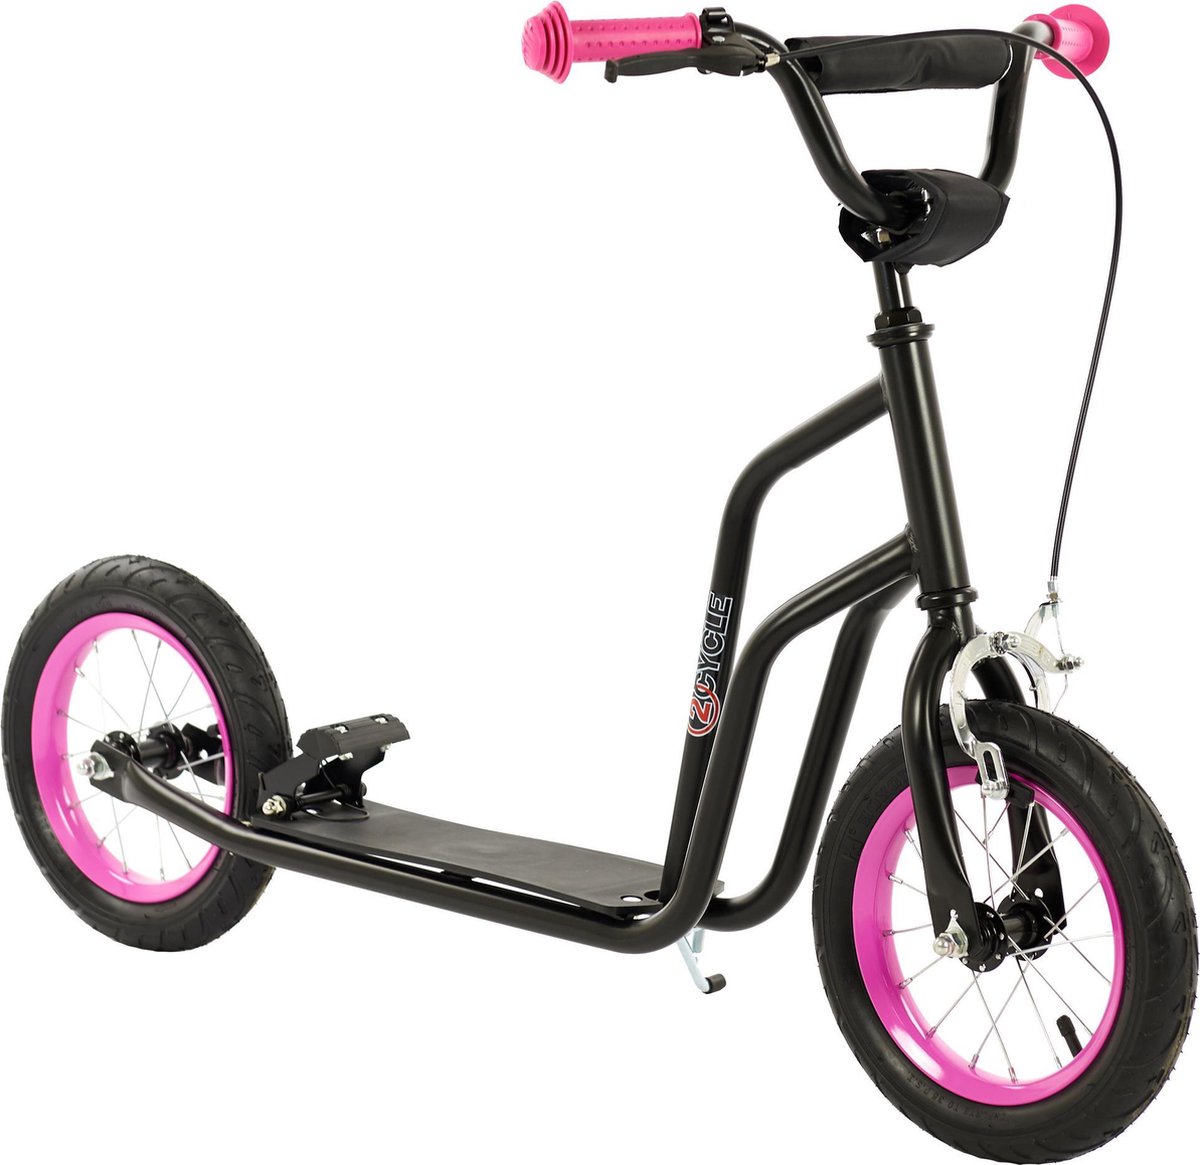 2Cycle Step - Luchtbanden - 12 inch - Zwart-Roze - Autoped - Scooter |  bol.com